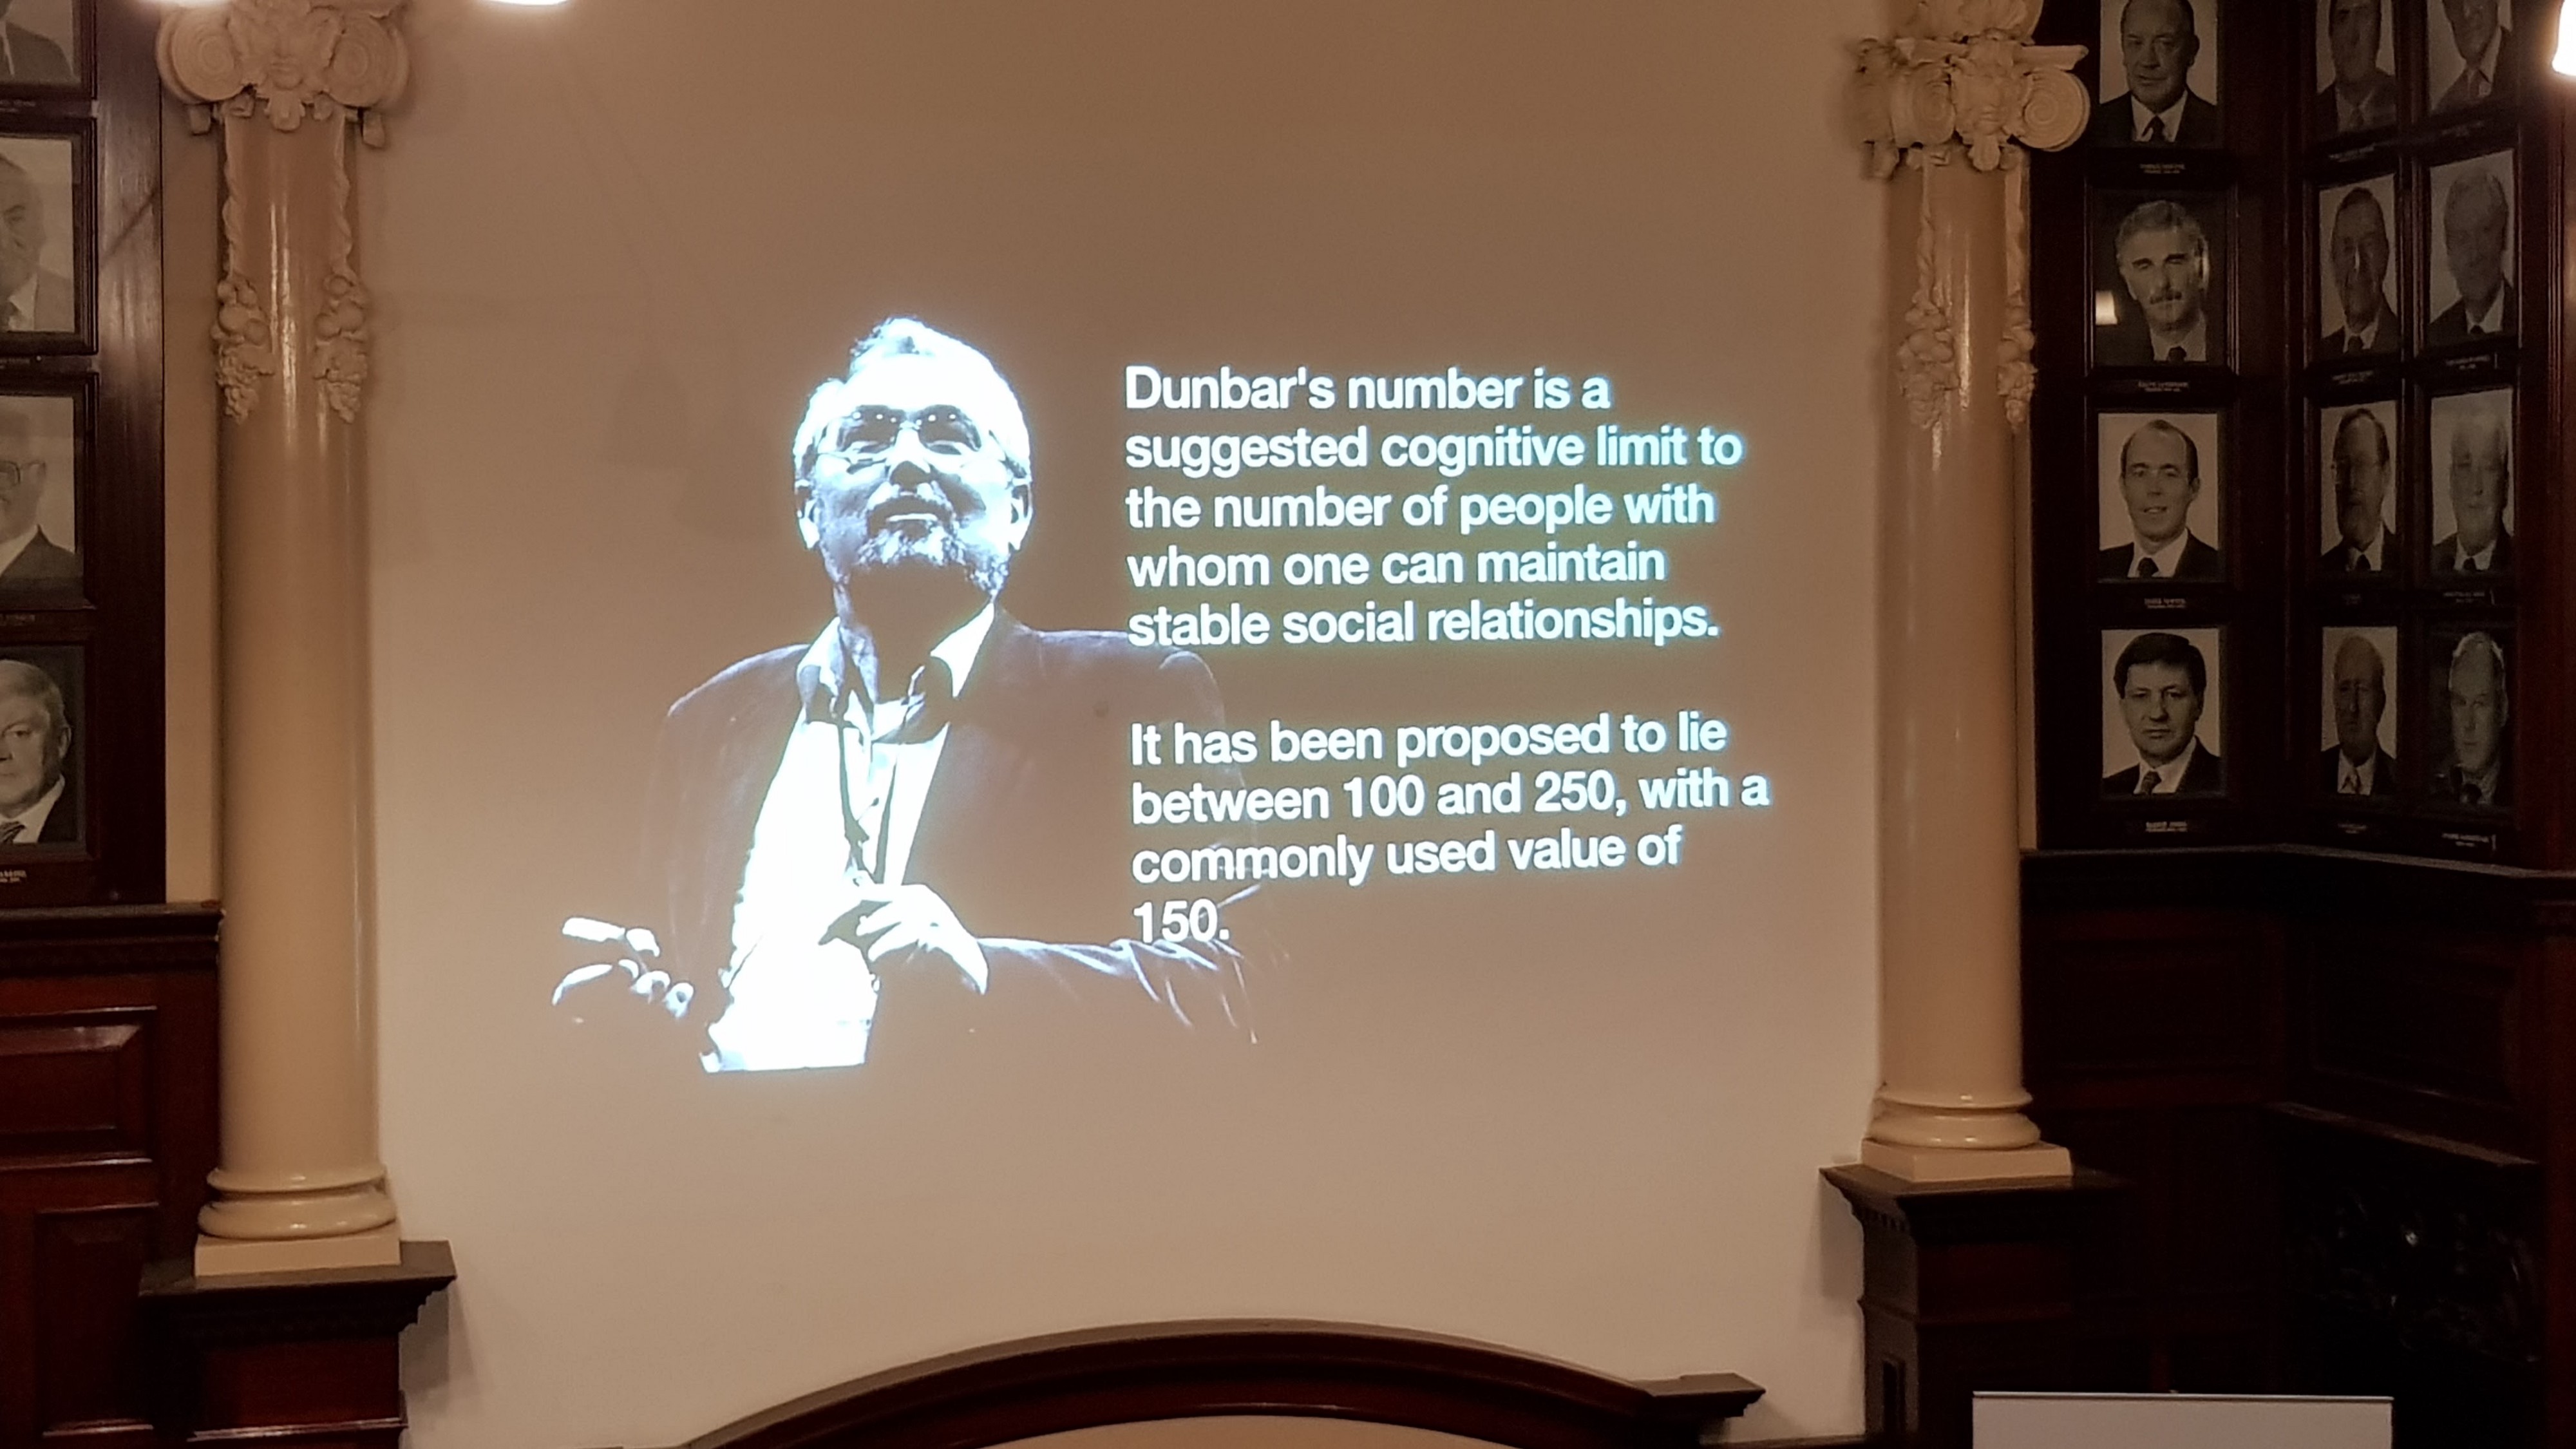 Dunbar’s number is a suggested cognitive limit to the number of people with whom one can maintain stable social relationships